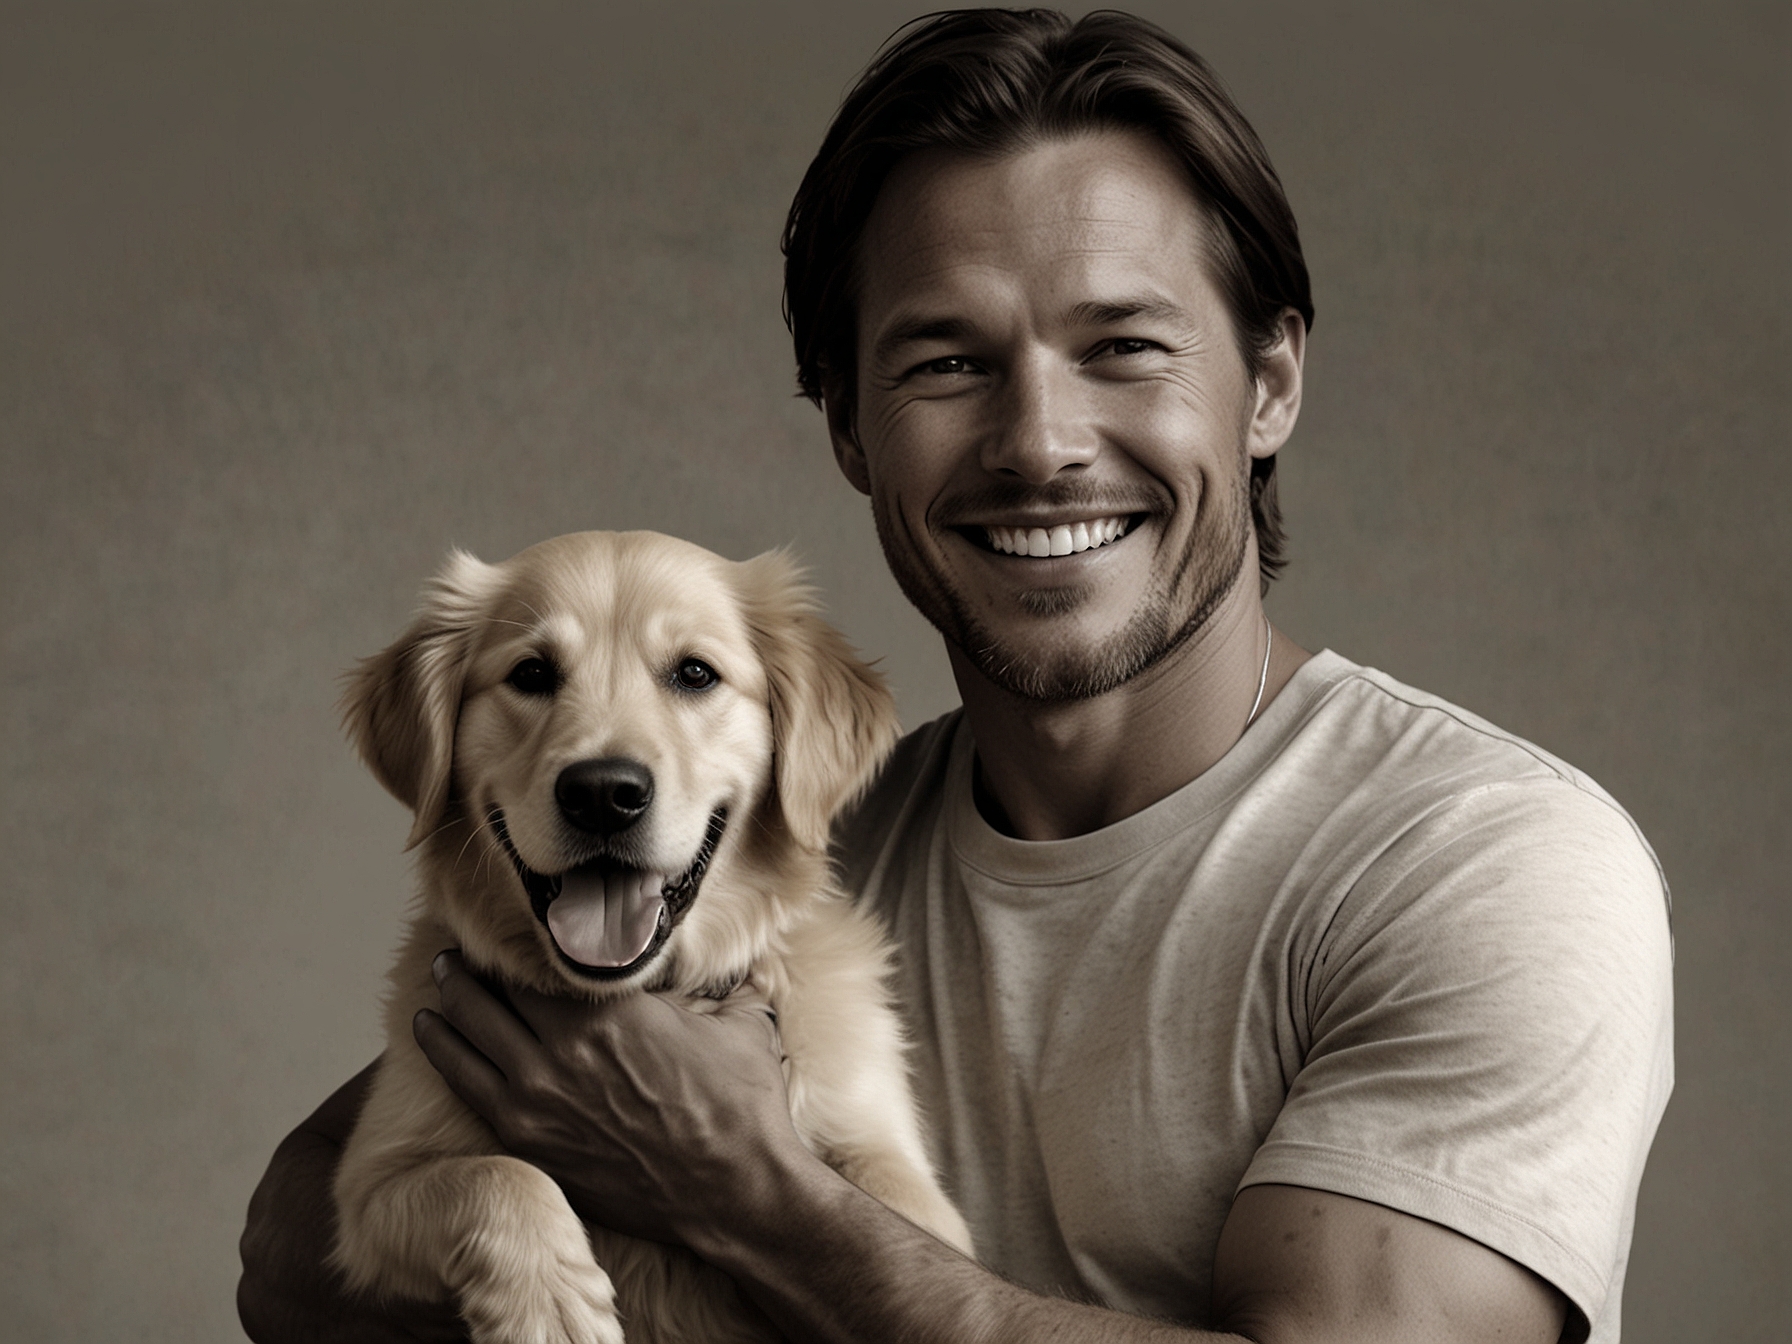 Ben Cousins smiles brightly while holding his new golden retriever puppy, Buddy, symbolizing a fresh start and emotional support in his journey towards personal transformation.